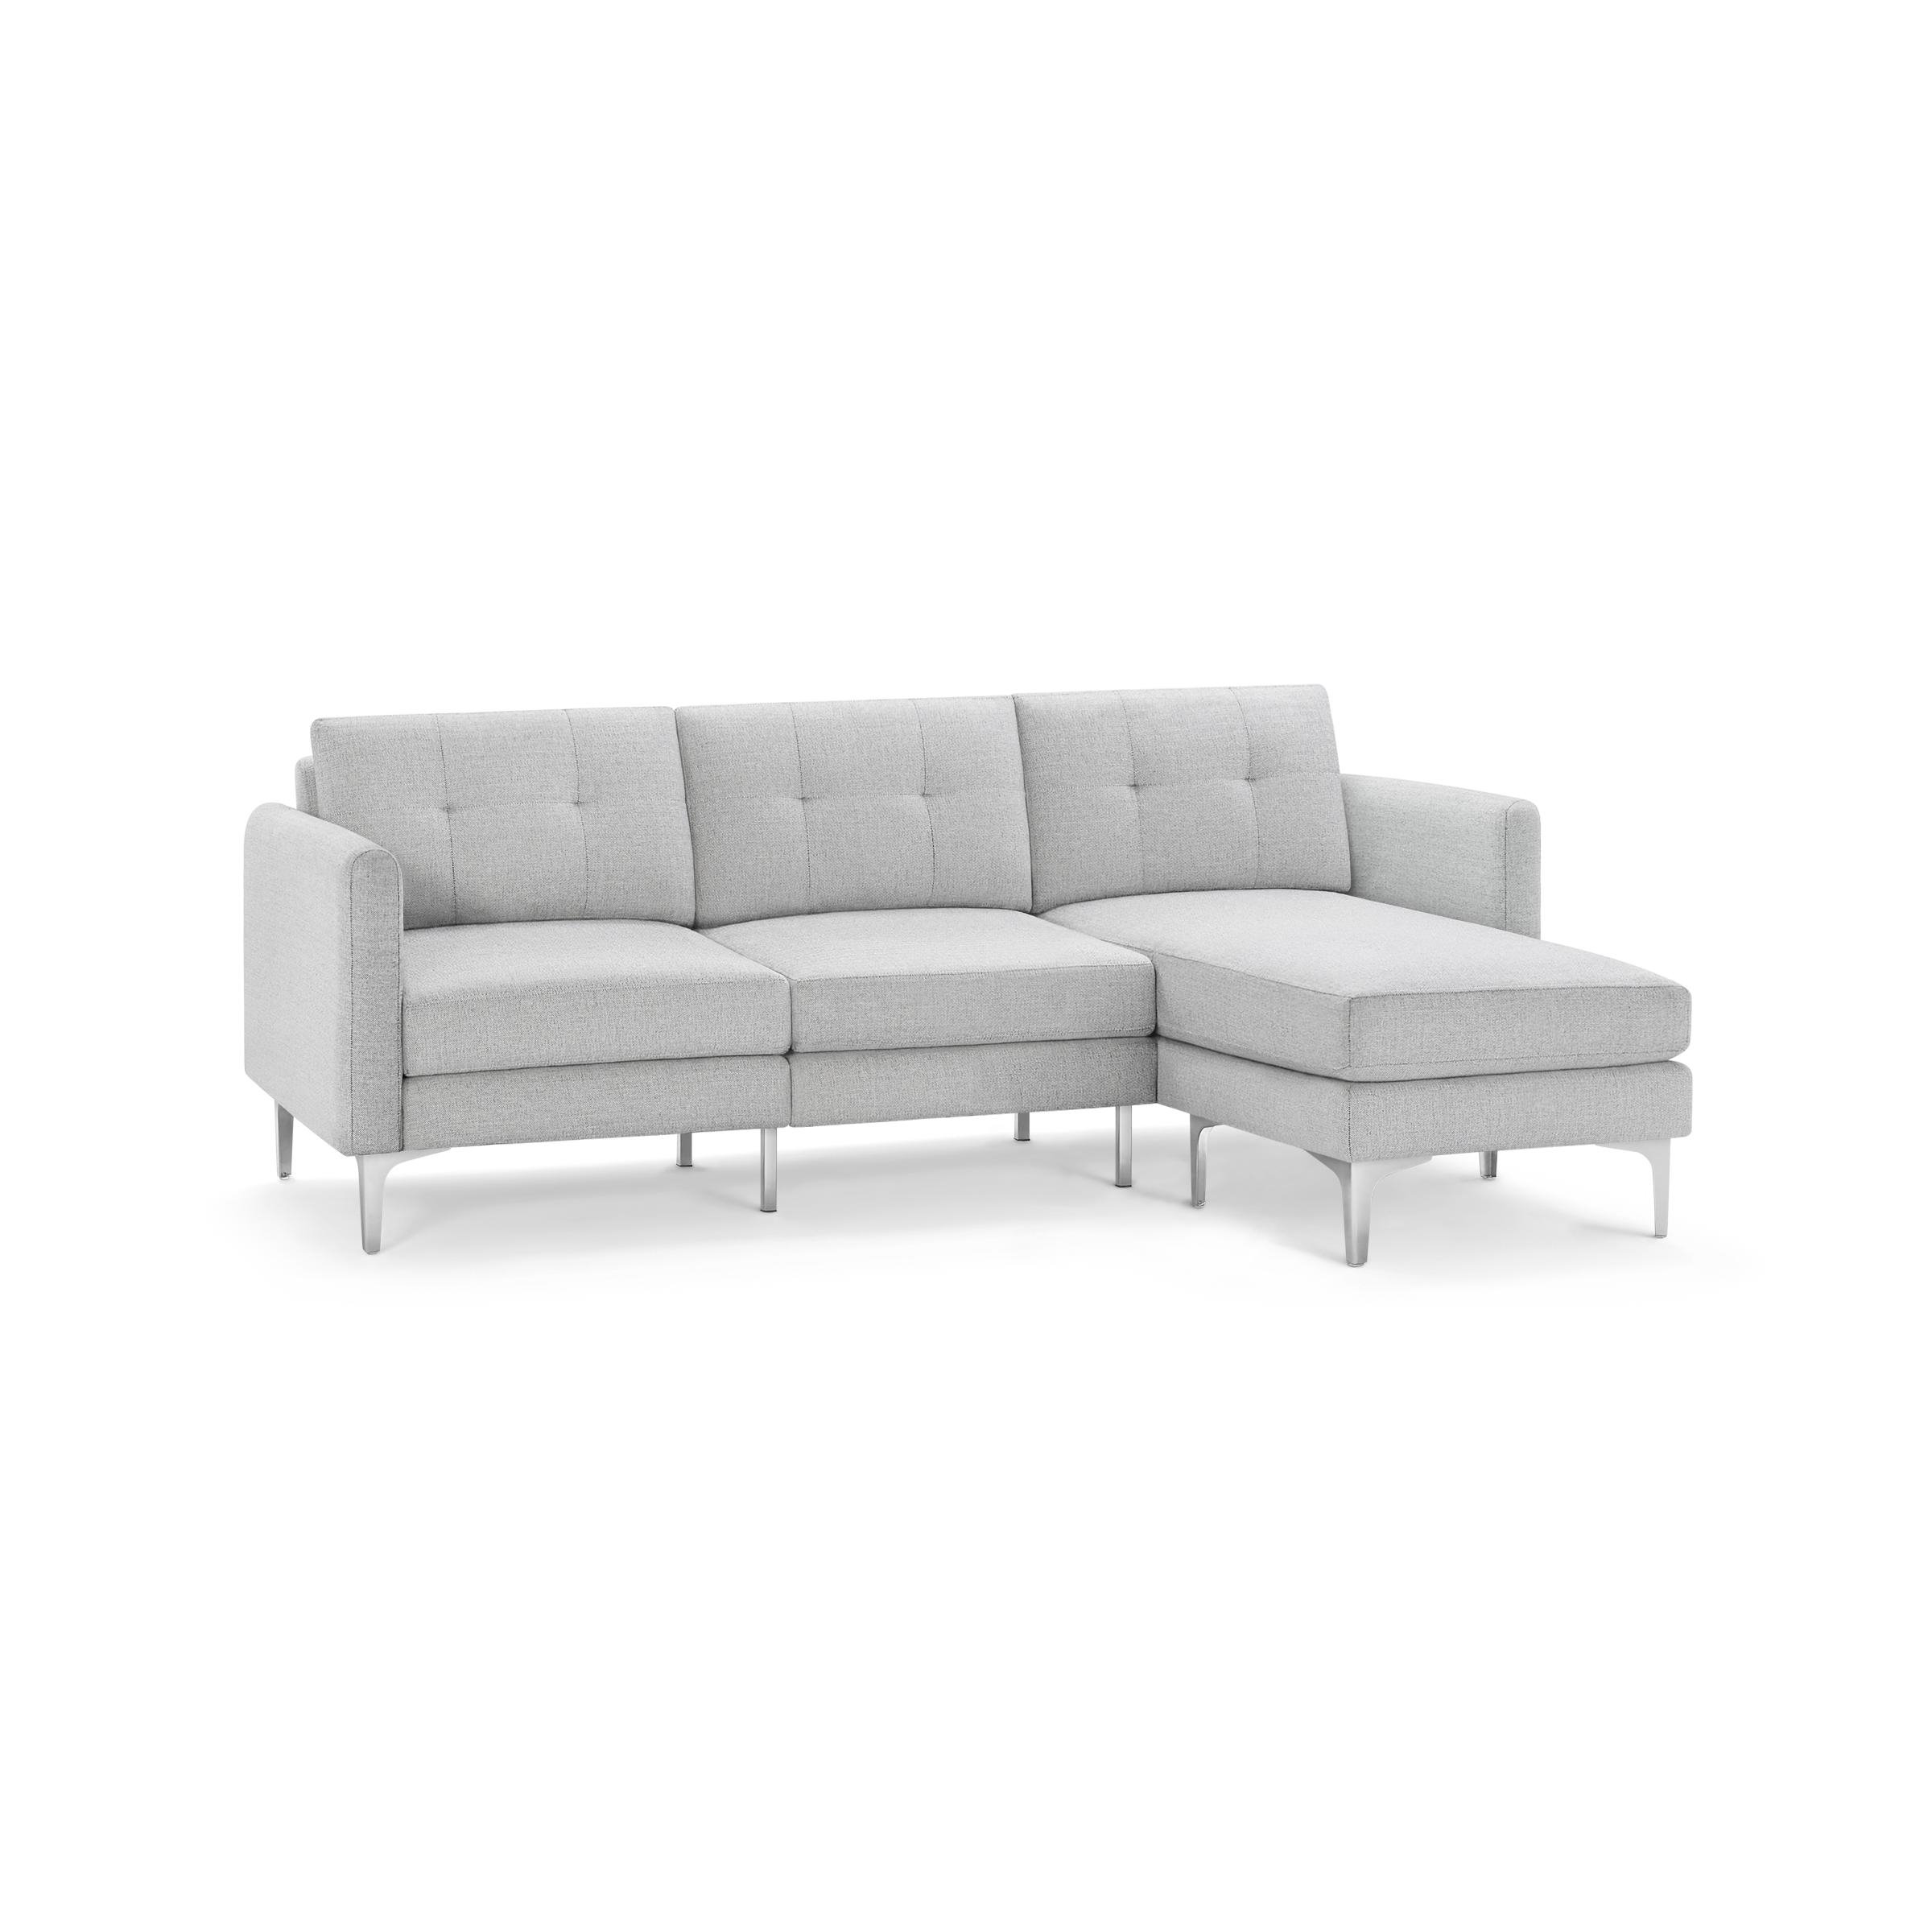 The Arch Nomad Sectional Sofa in Crushed Gravel - Image 1